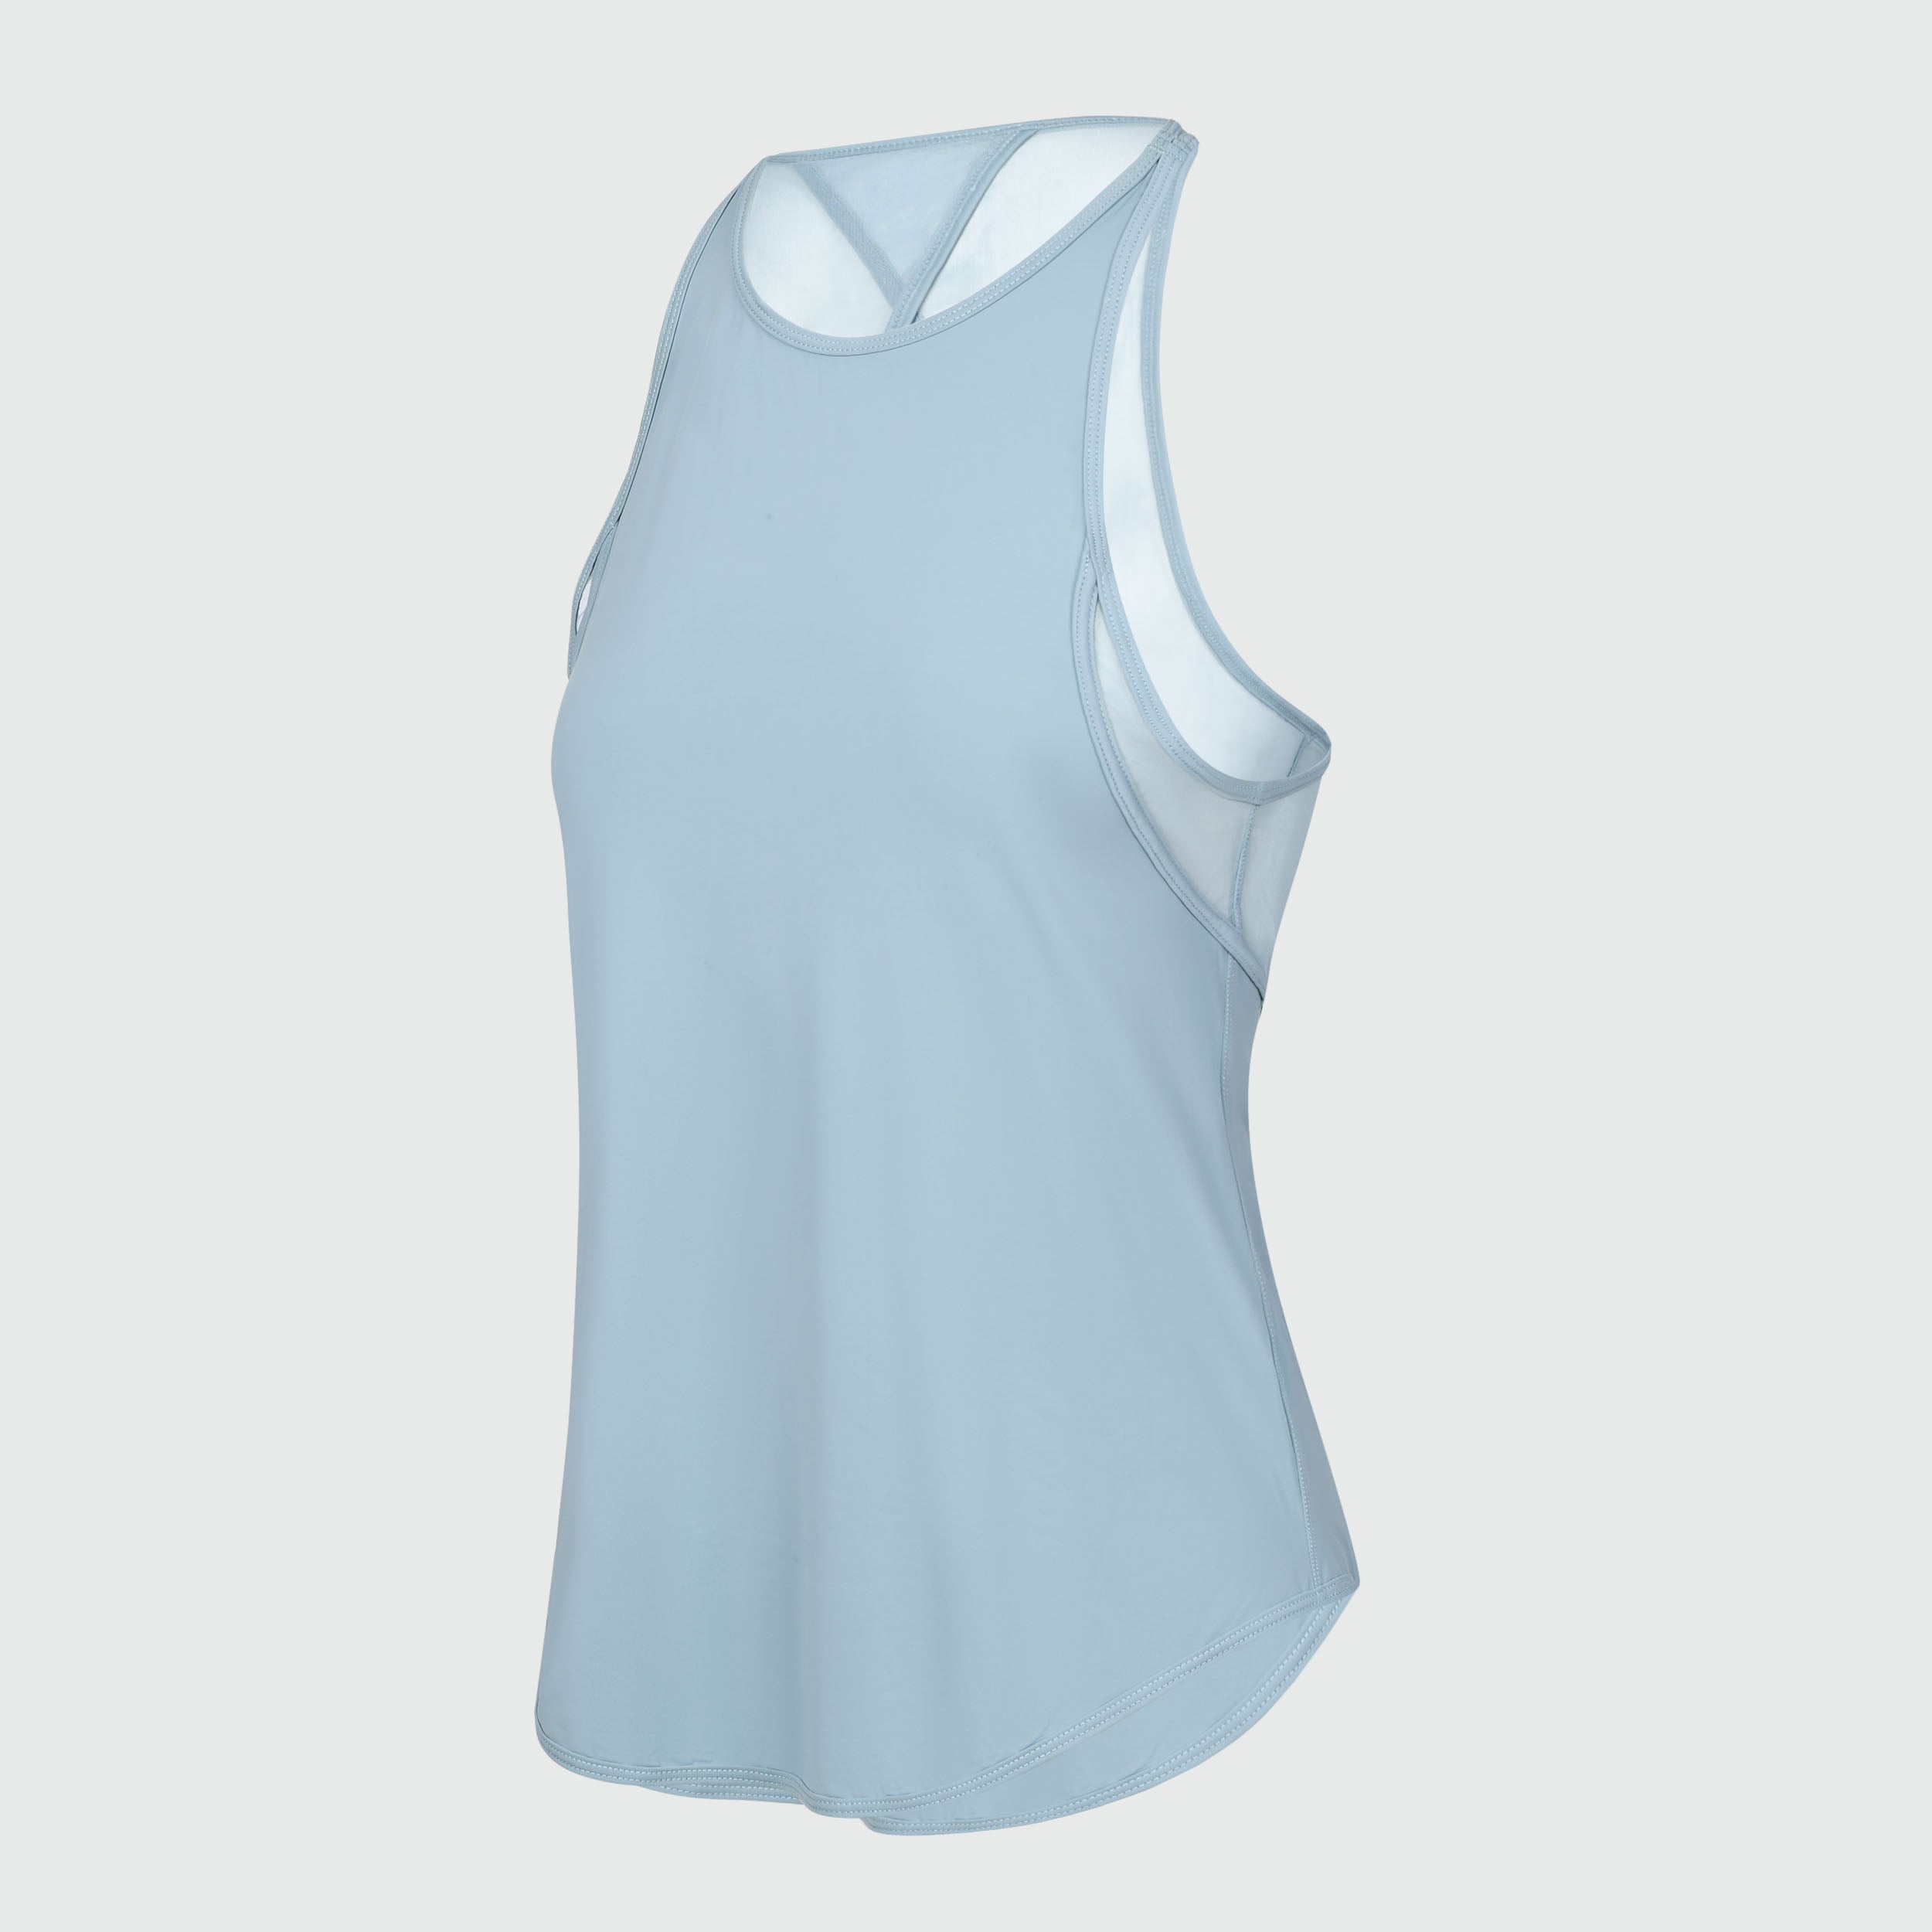 Womens Tank Tops $4.98 Clearance,AXXD Spring And Summer Cross Strap Open  Back Strap Knitted Tight Flowy Tank Tops for Women Blue 6